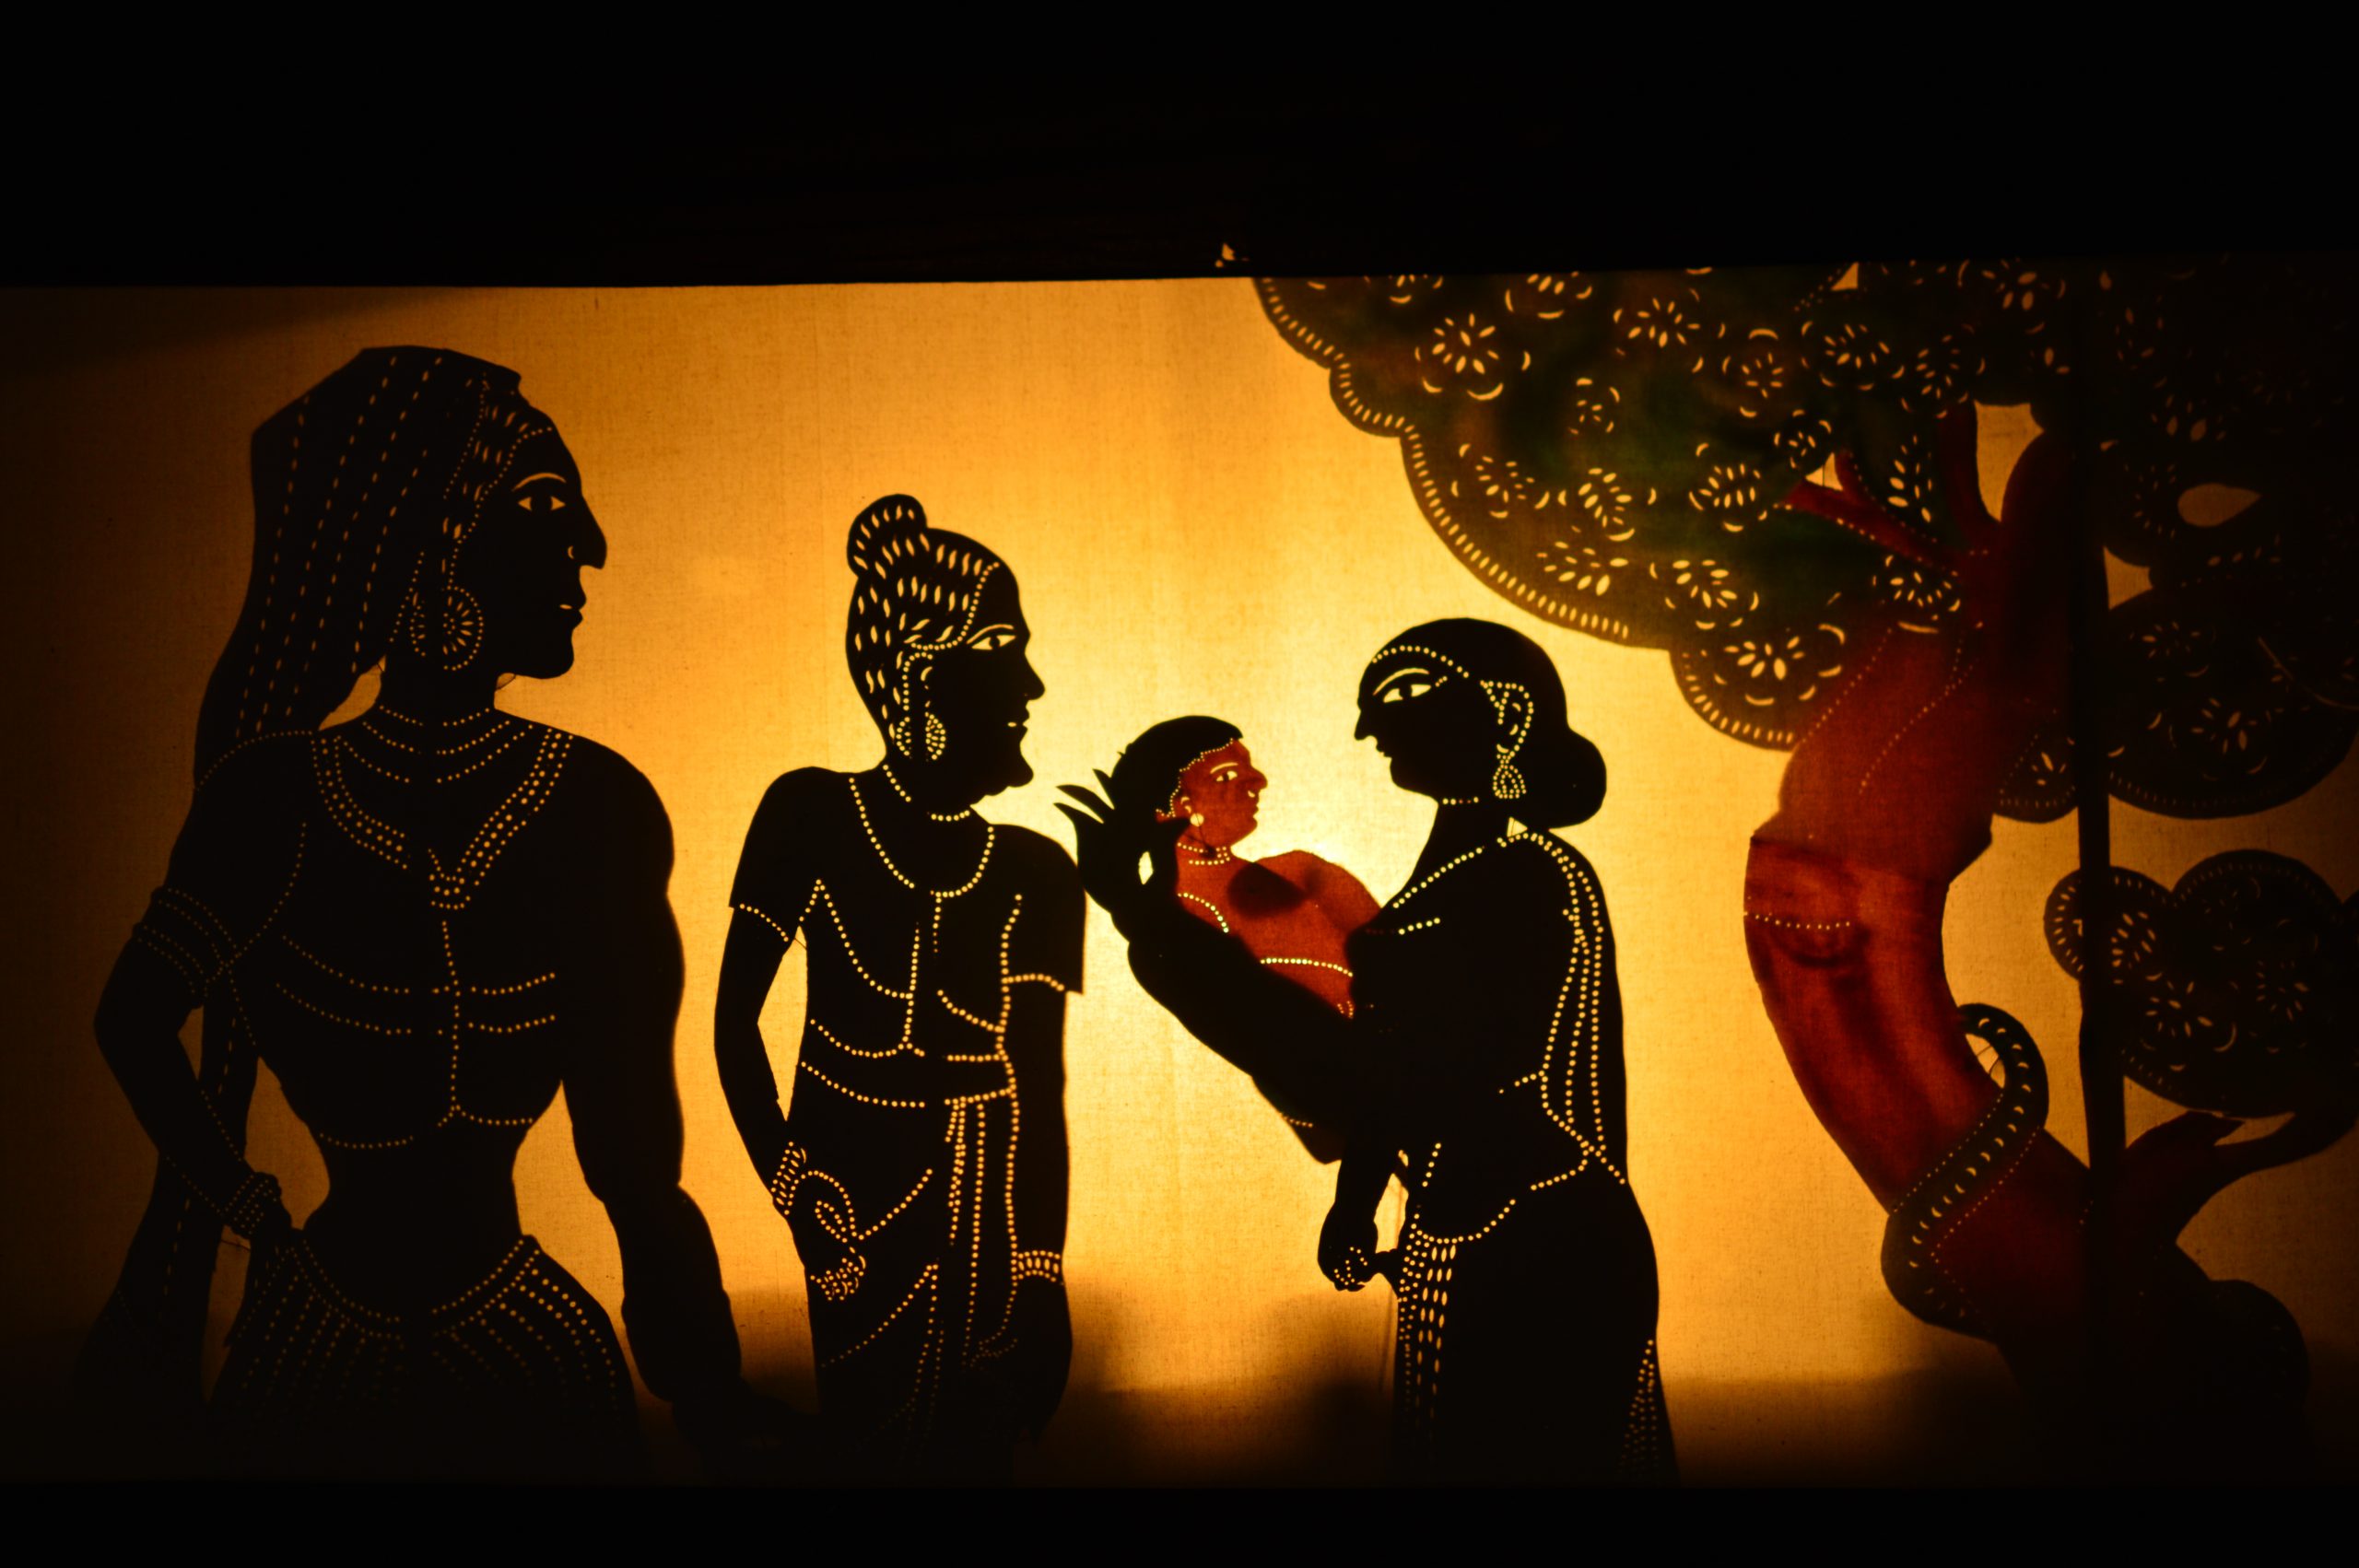 Image portrays shadow puppetry in action. Four figures, one a child, are grouped together beside a stylized tree.